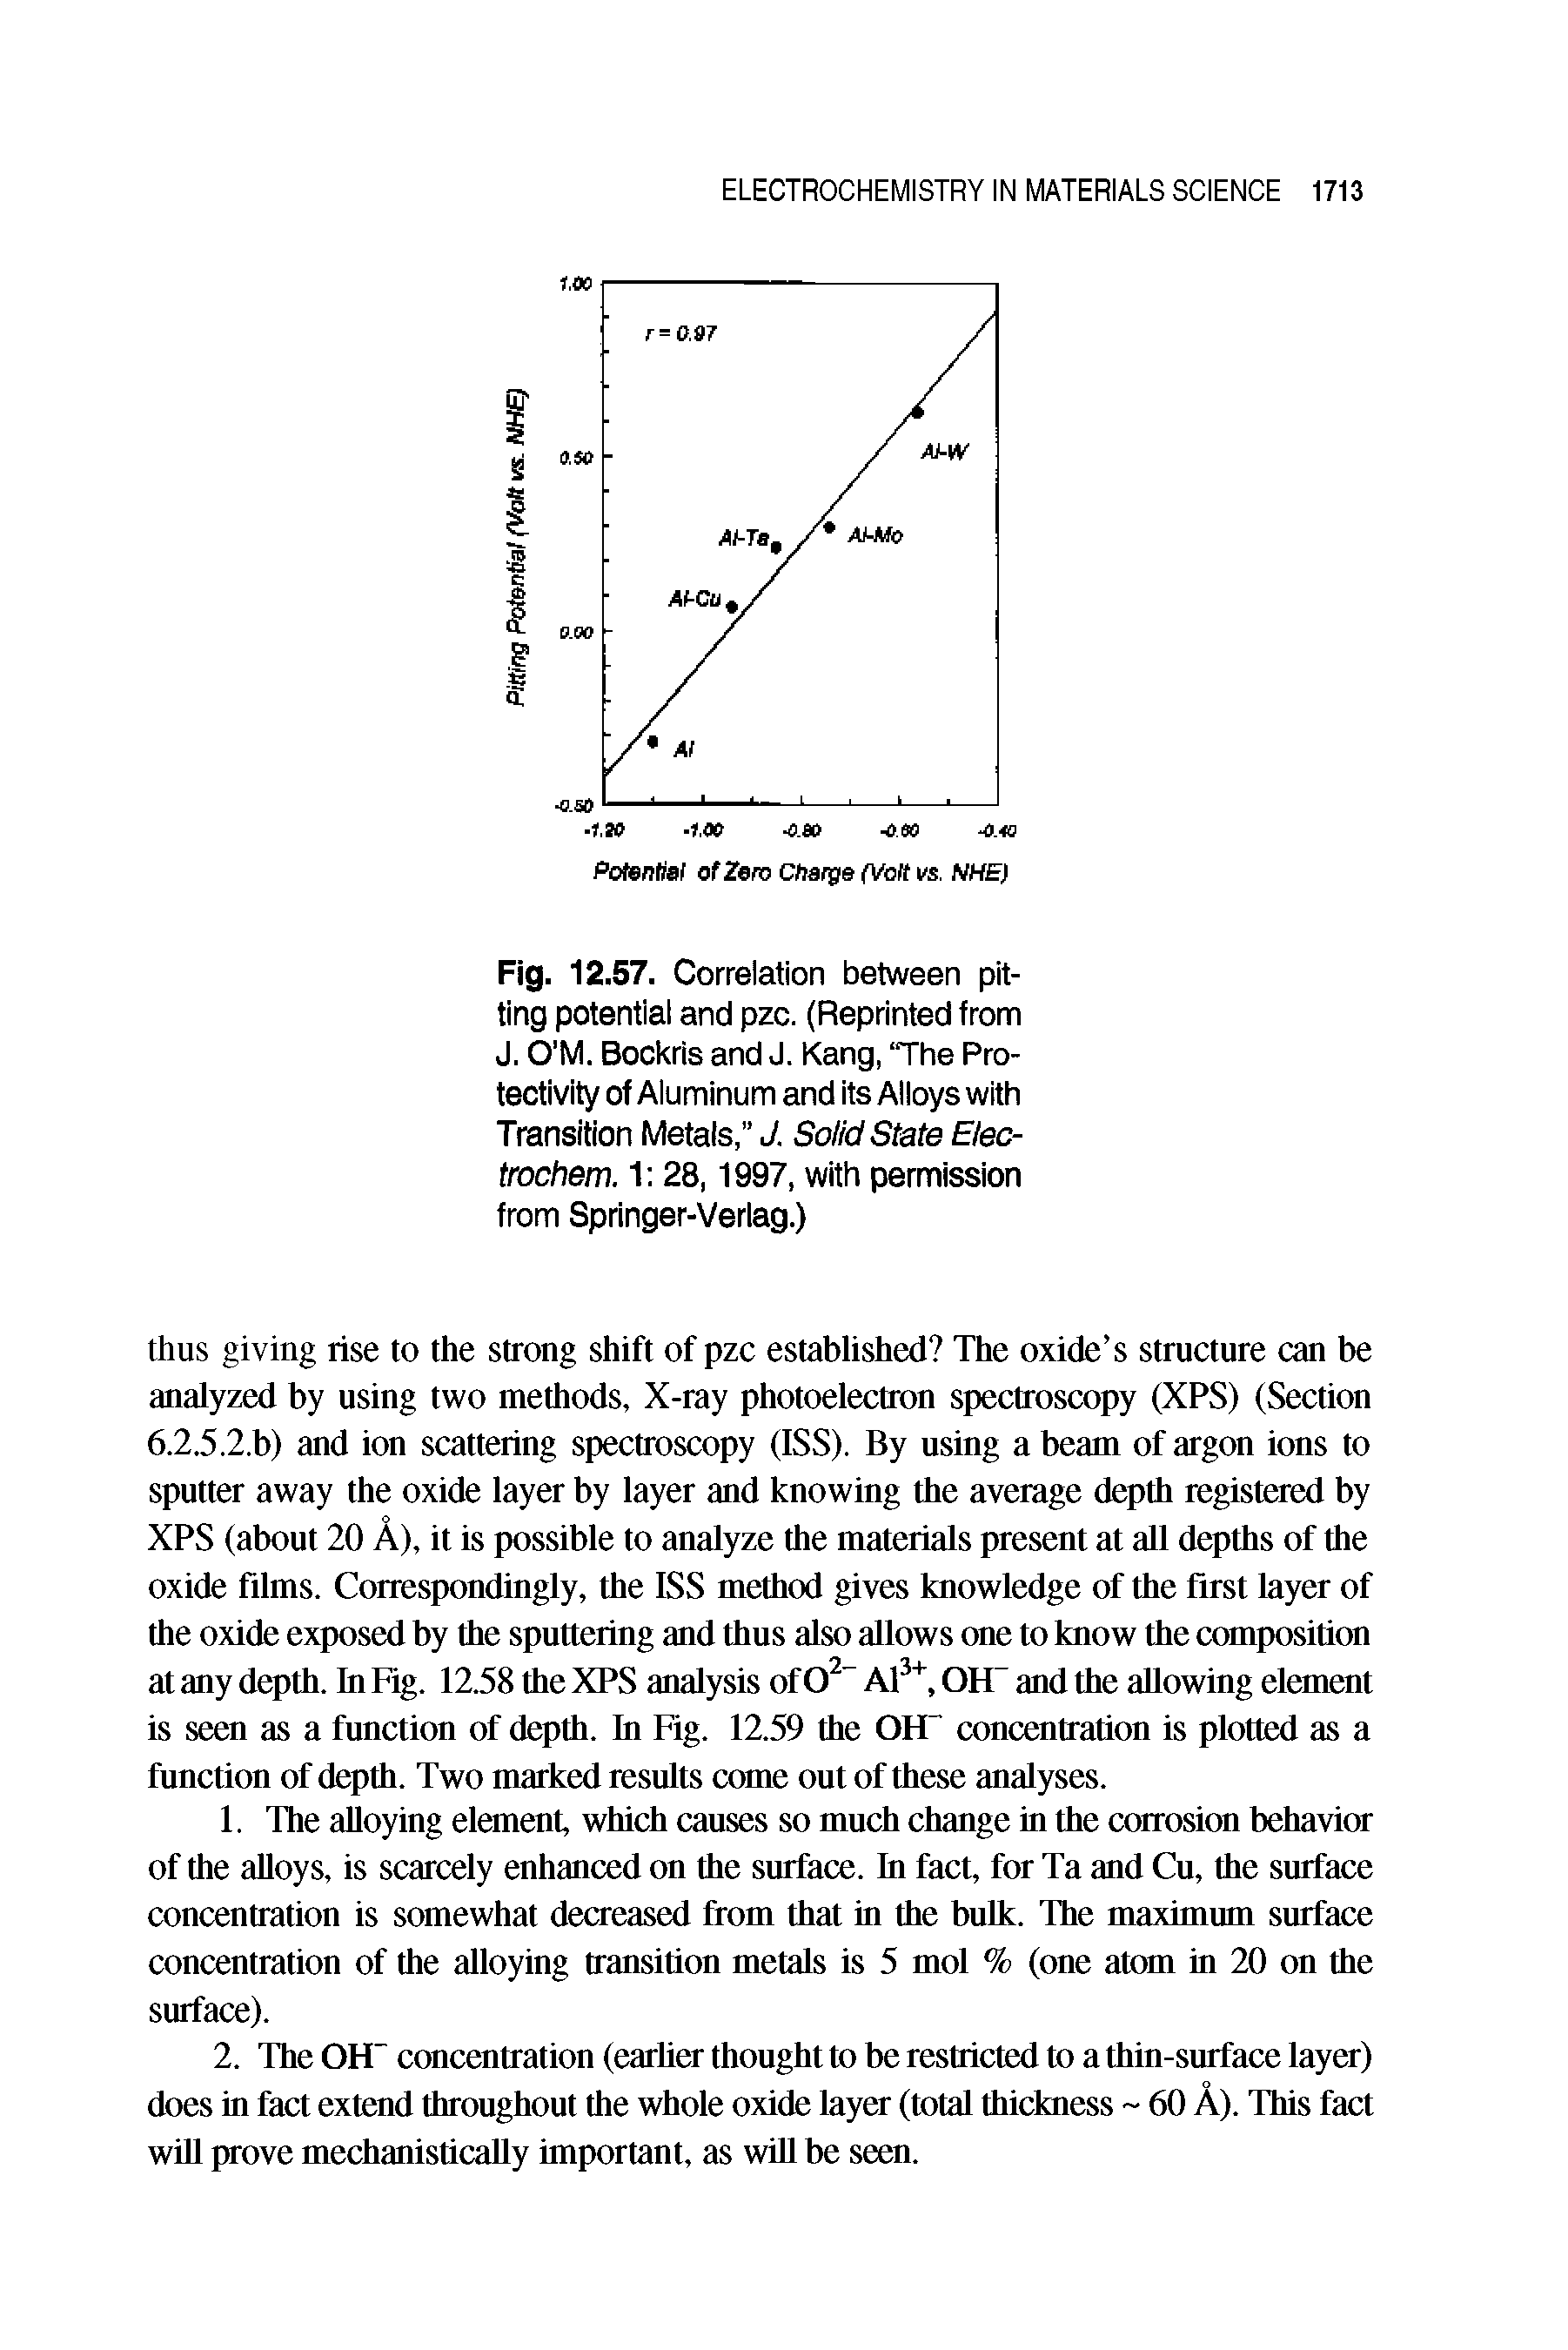 Fig. 12.57. Correlation between pitting potential and pzc. (Reprinted from J. O M. Bockris and J. Kang, The Pro-tectivity of Aluminum and its Alloys with Transition Metals, J. Solid State Elec-trochem. 1 28,1997, with permission from Springer-Verlag.)...